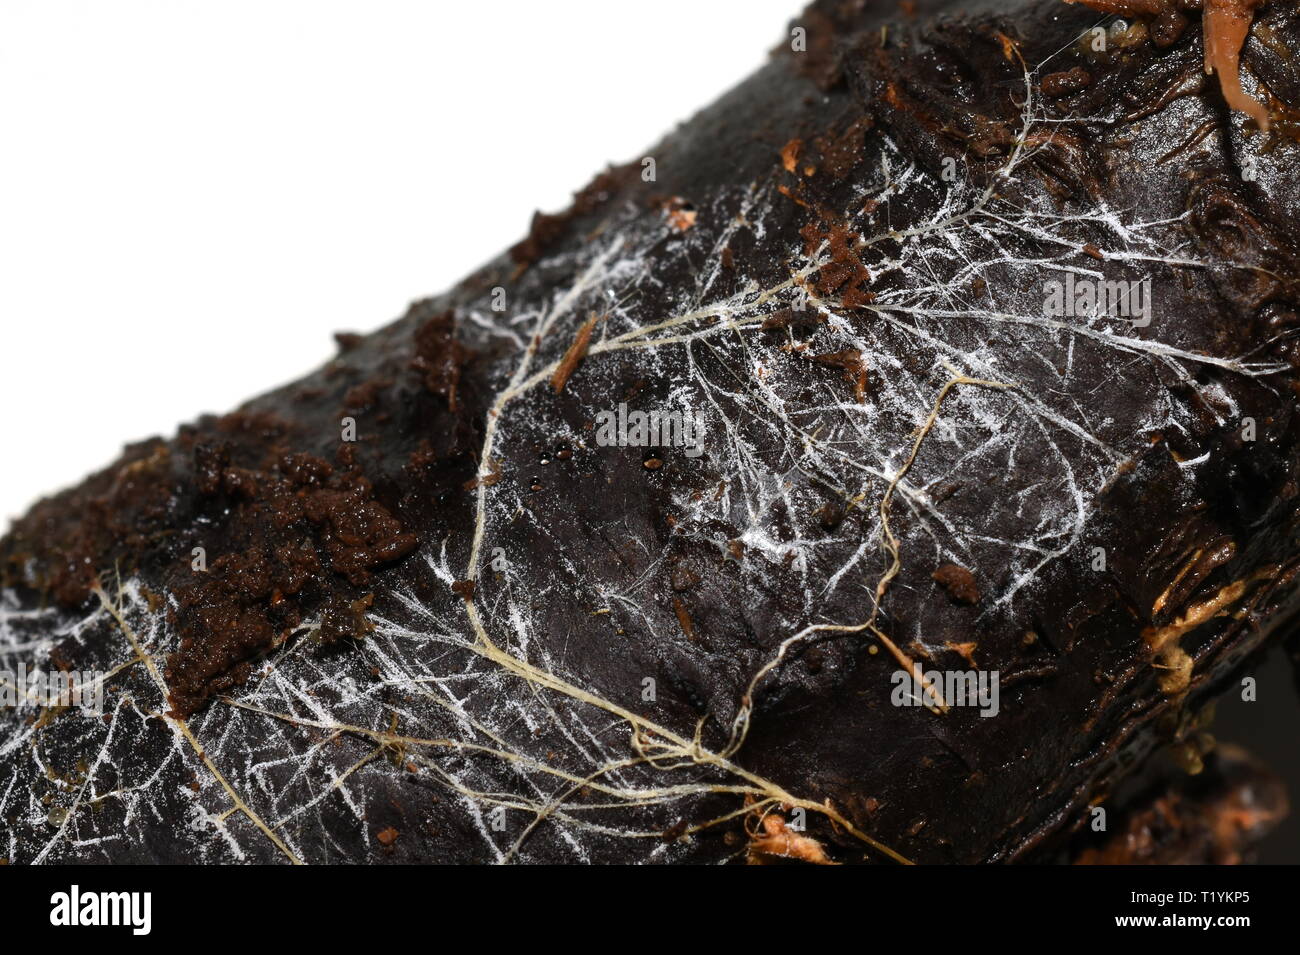 Mycelium growing on a decaying trunk Stock Photo